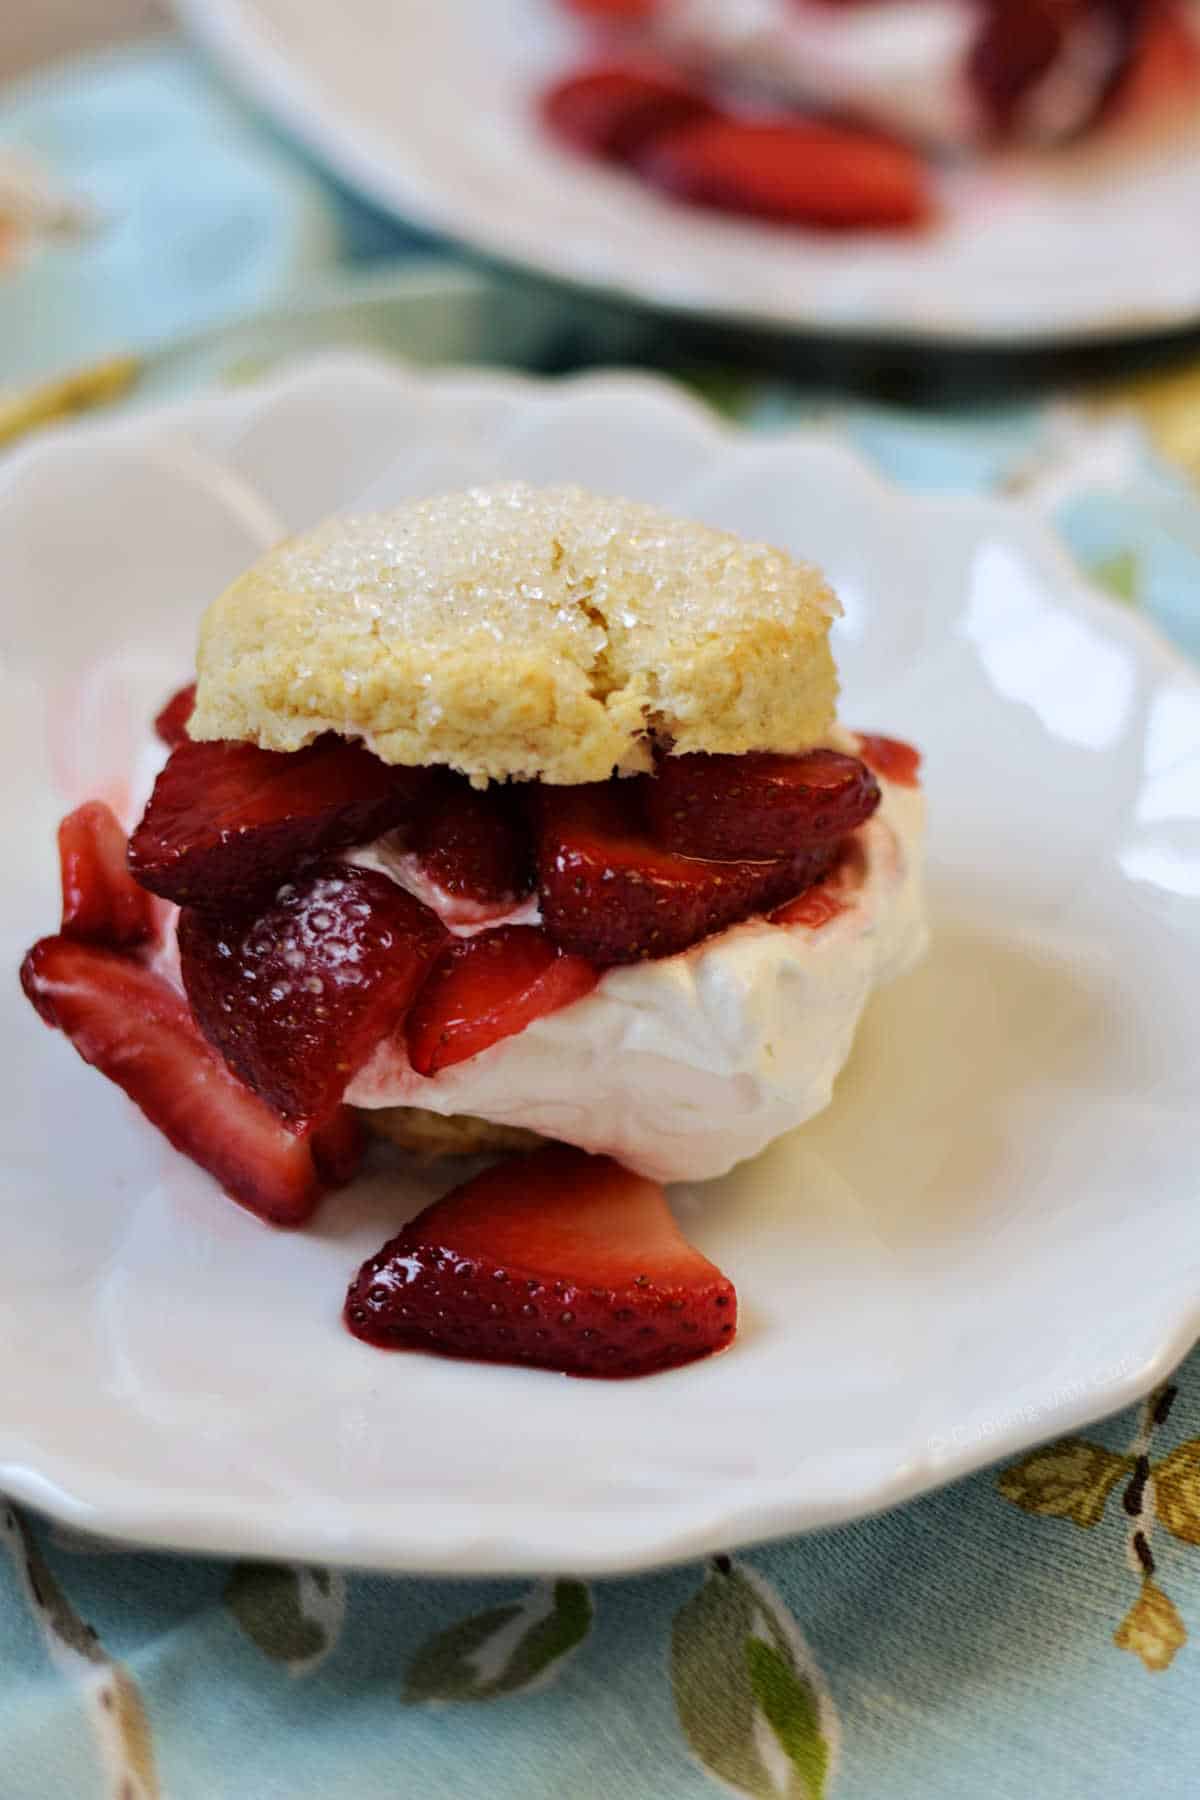 Two sugar topped biscuits cut in half and filled with whipped cream and sliced strawberries on a dessert plates.